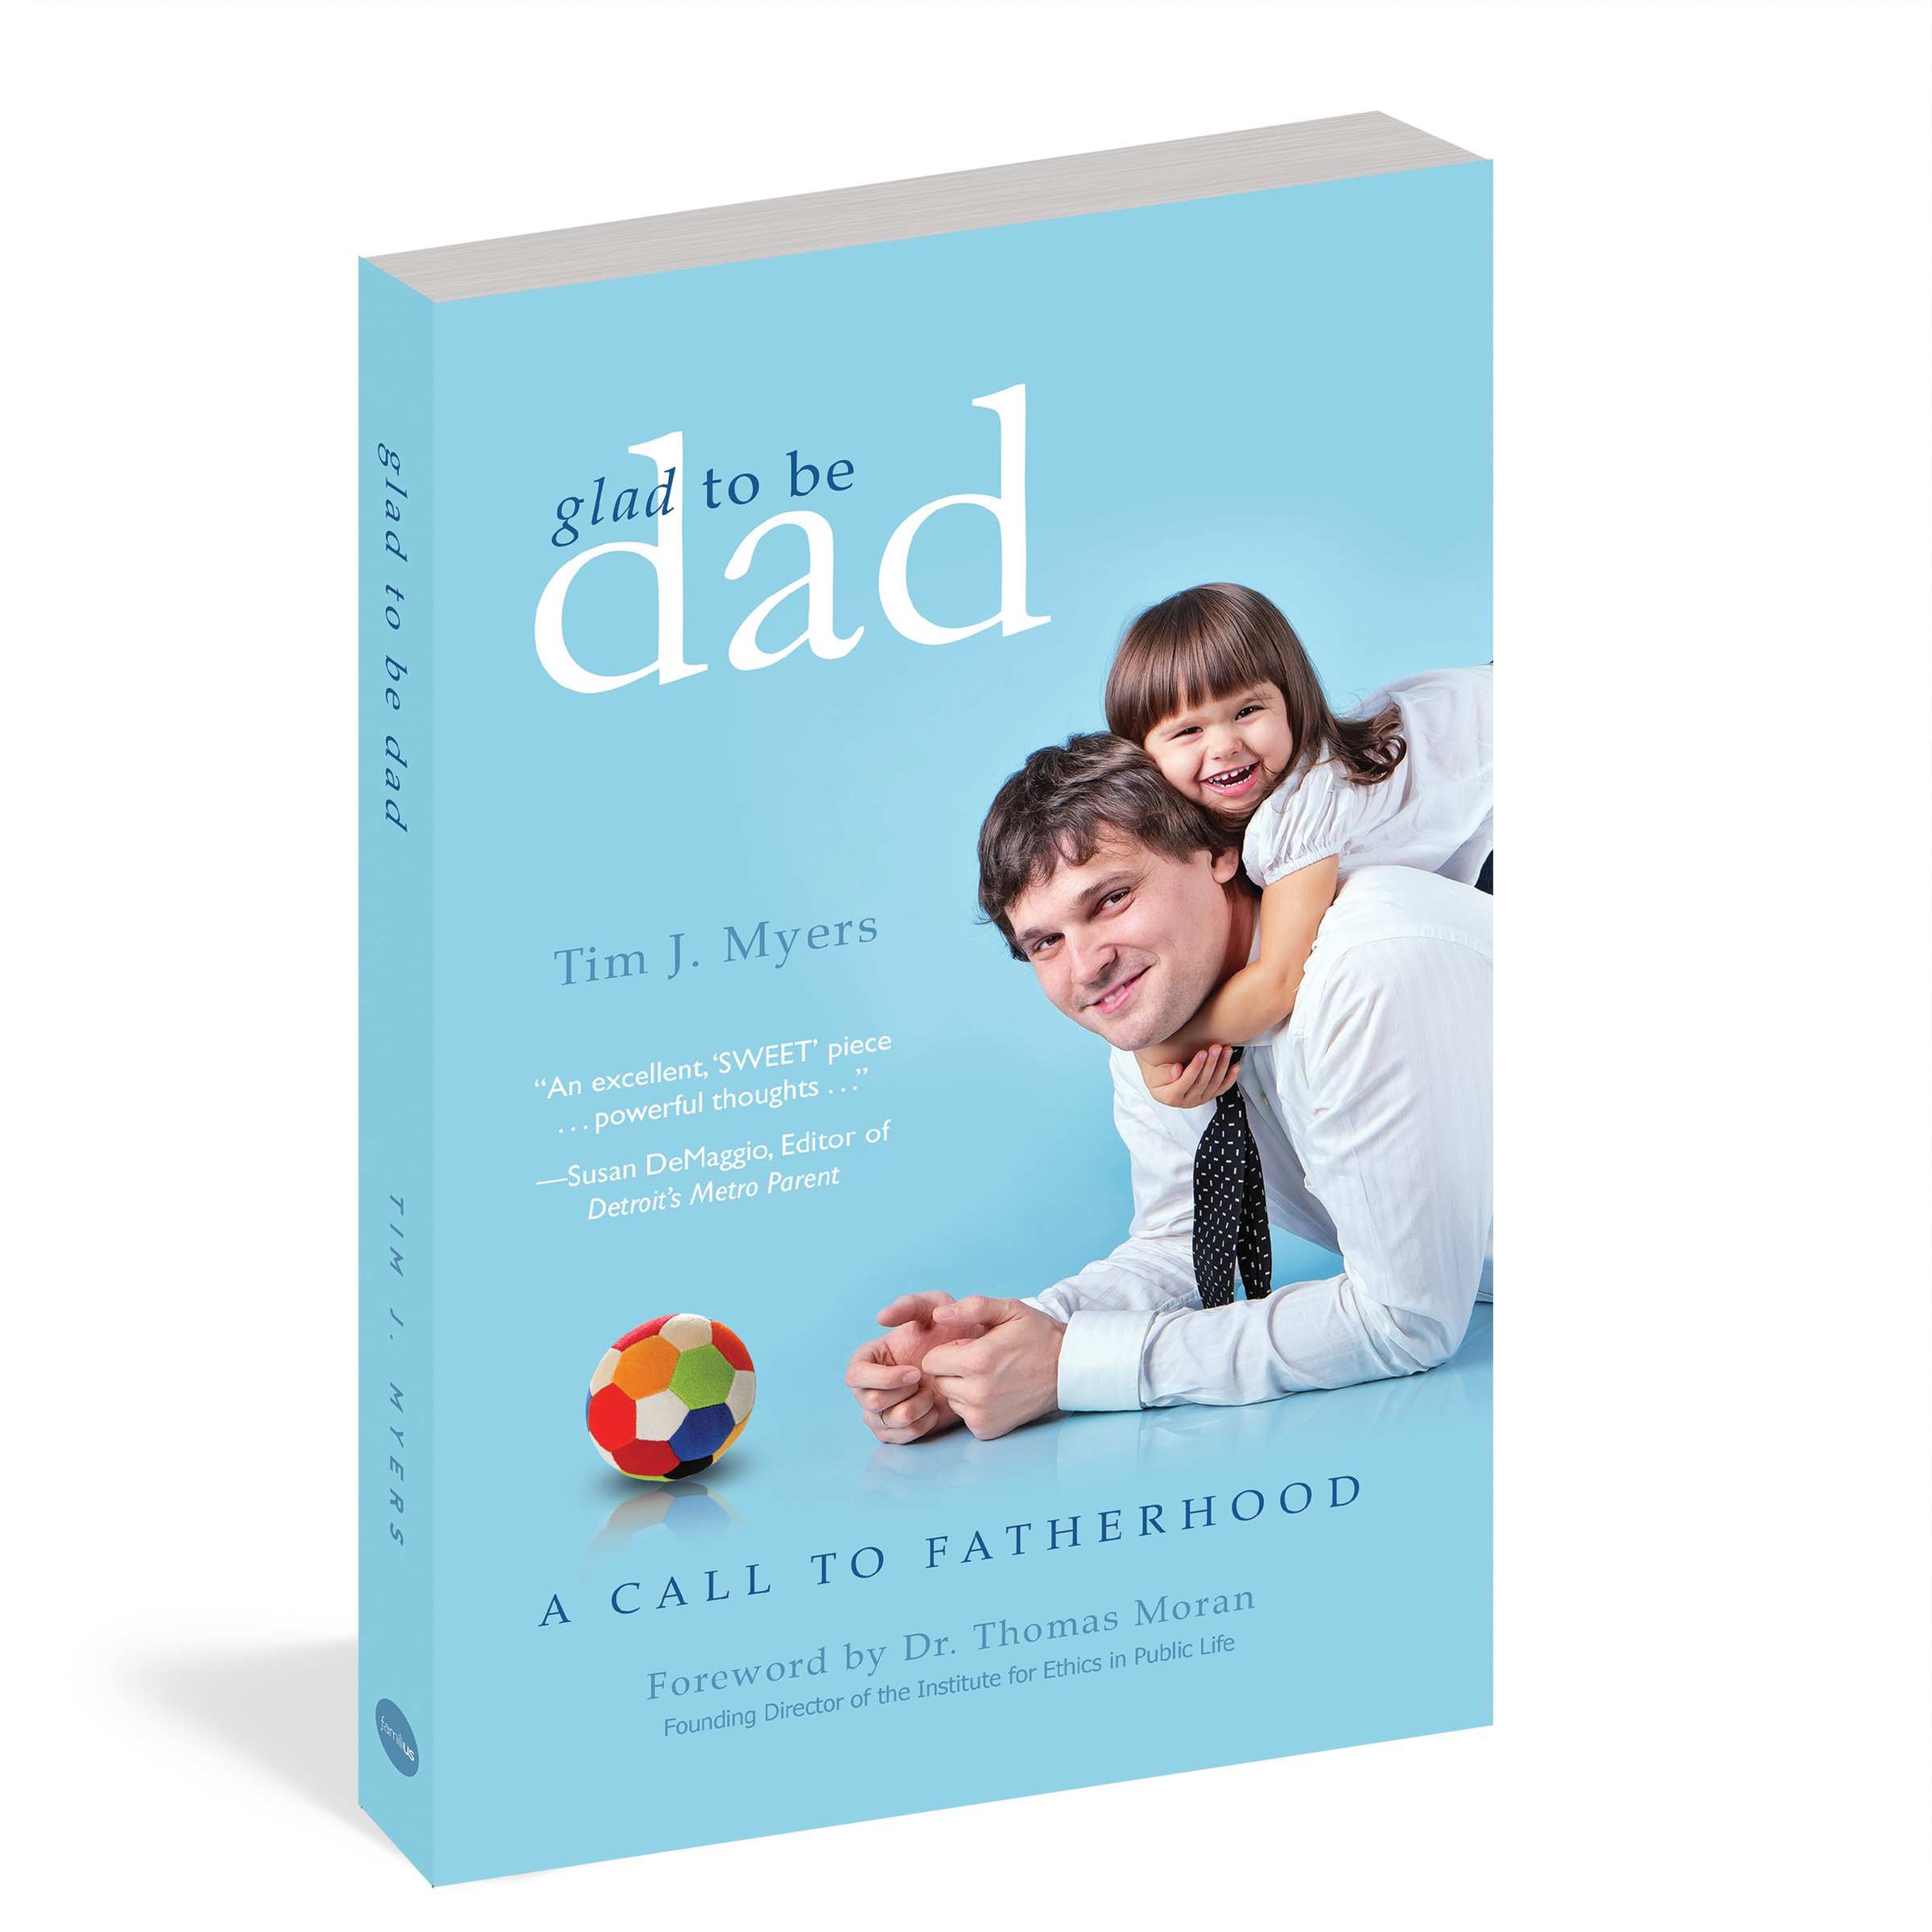 The cover of the book Glad to Be Dad.